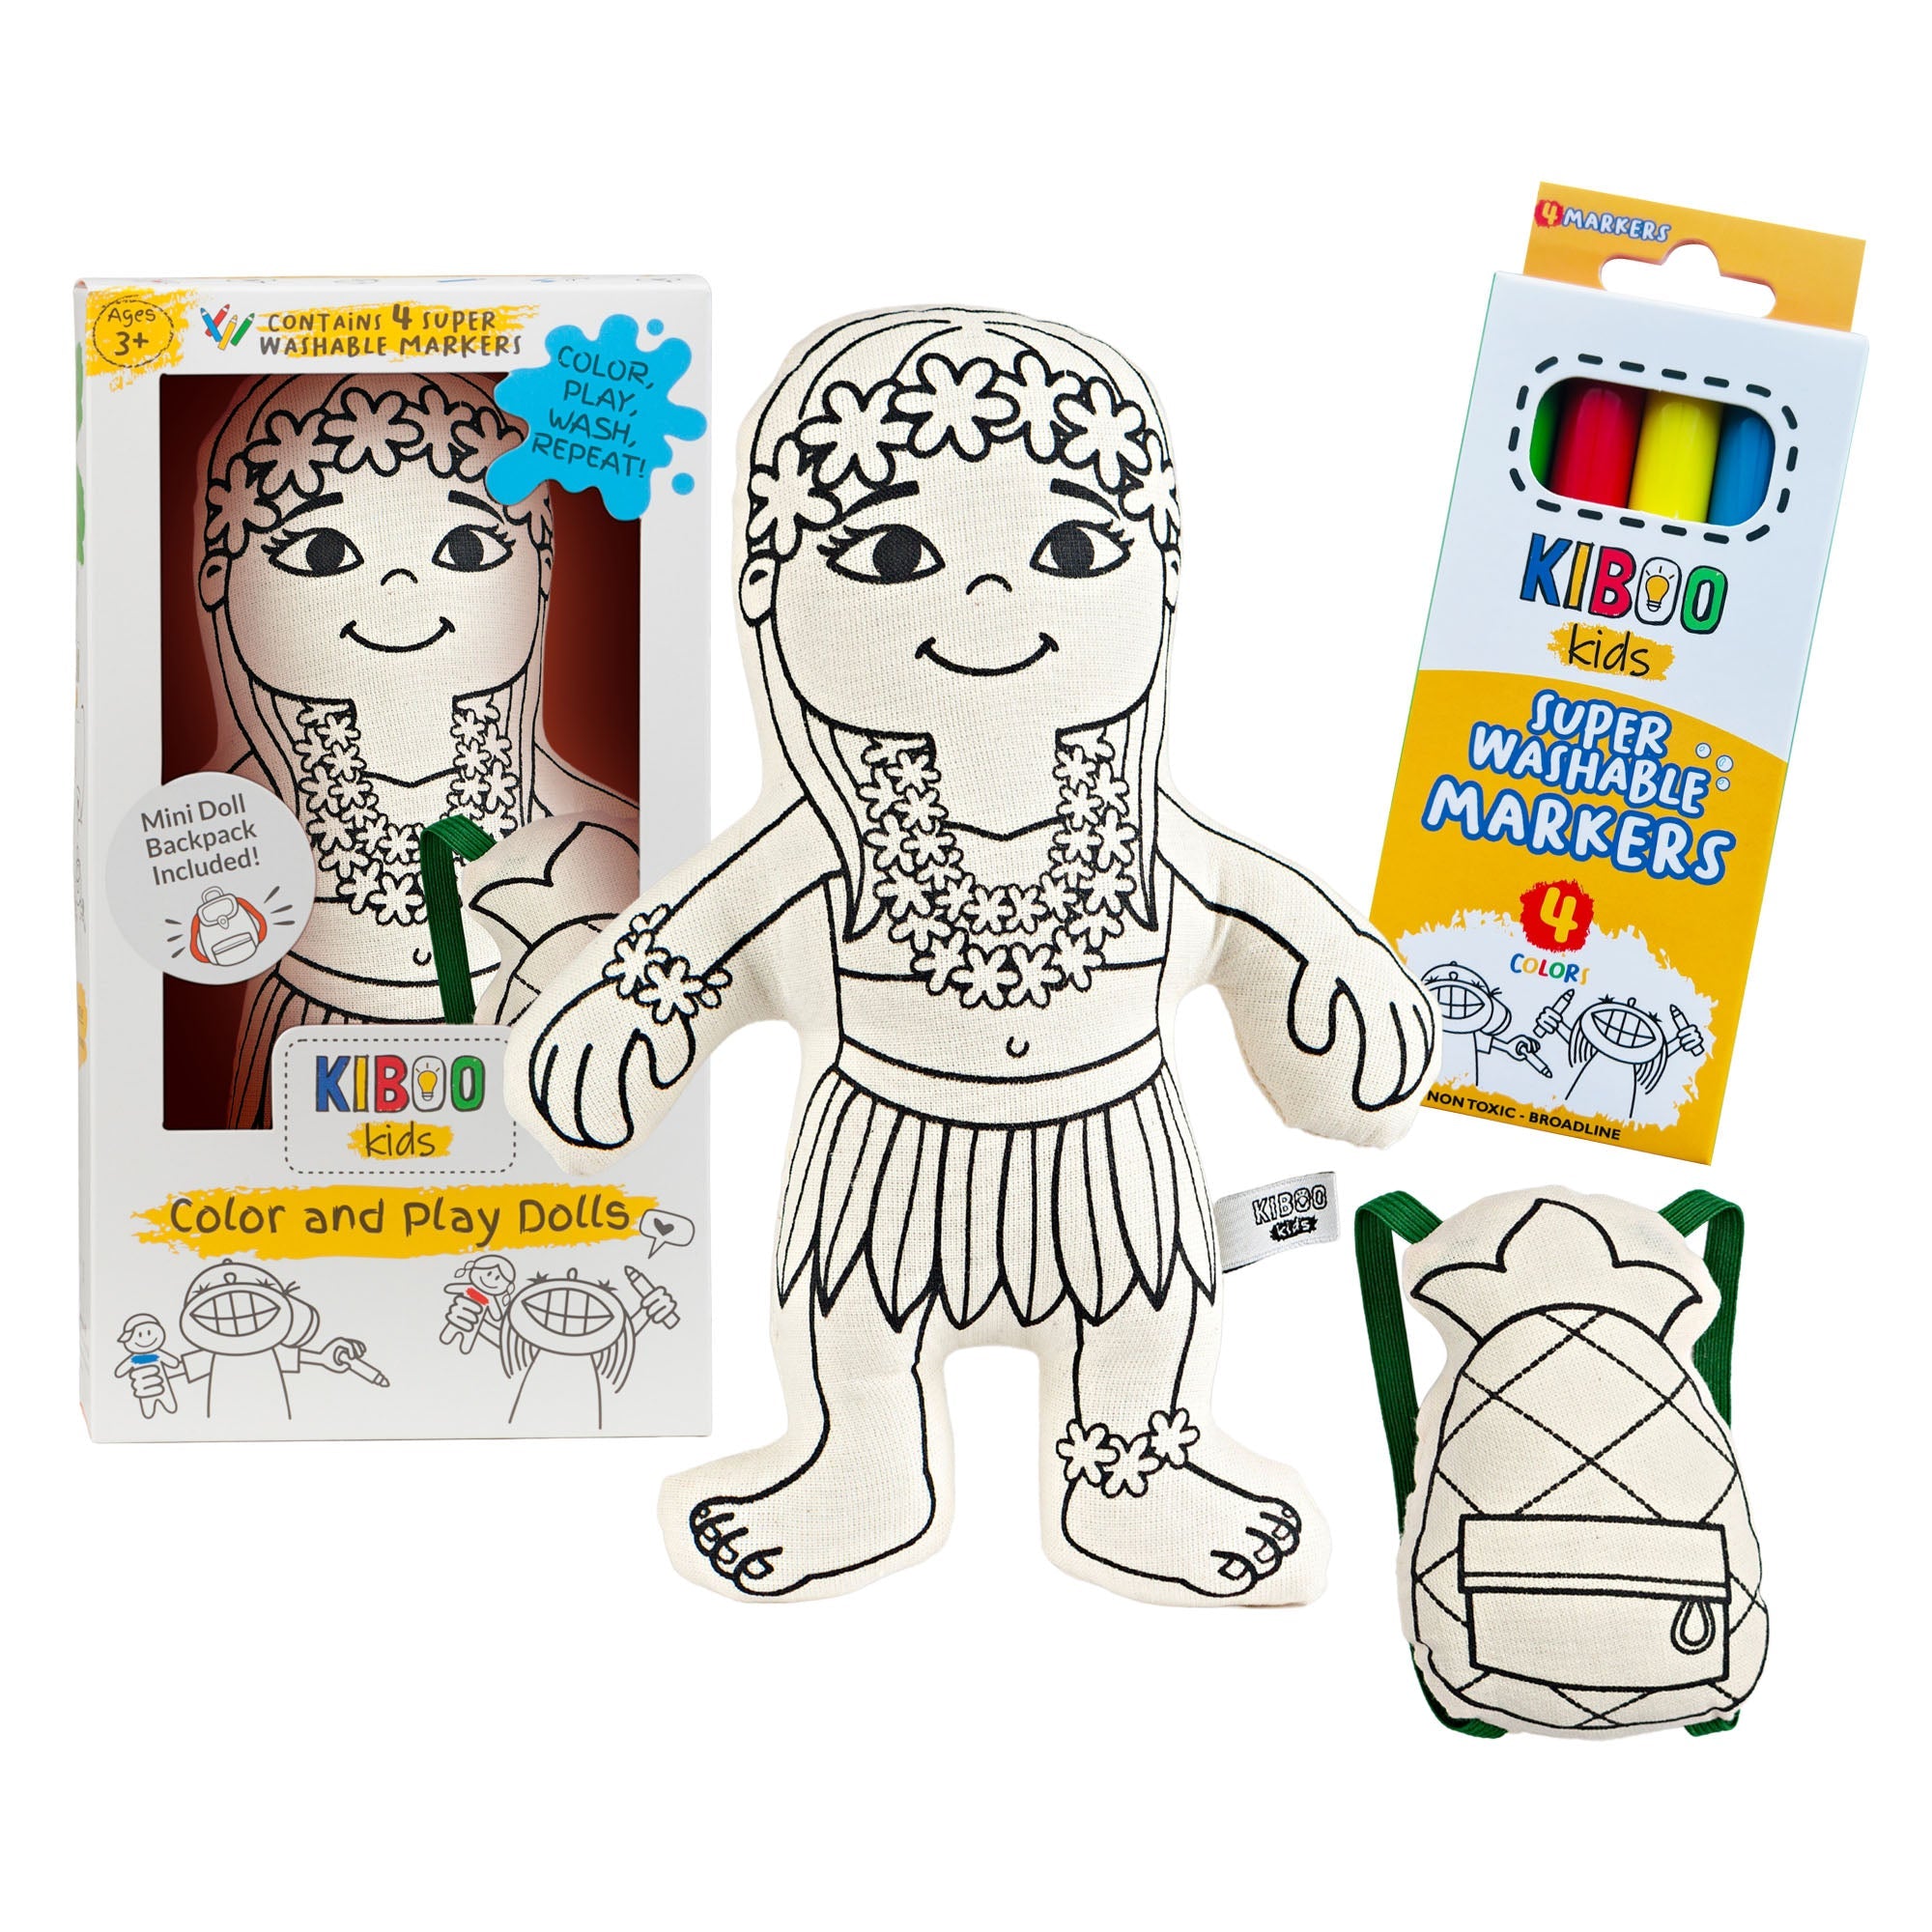 Kiboo Kids: Hula Girl With Mini Pineapple Backpack - Colorable And Washable Doll For Creative Play